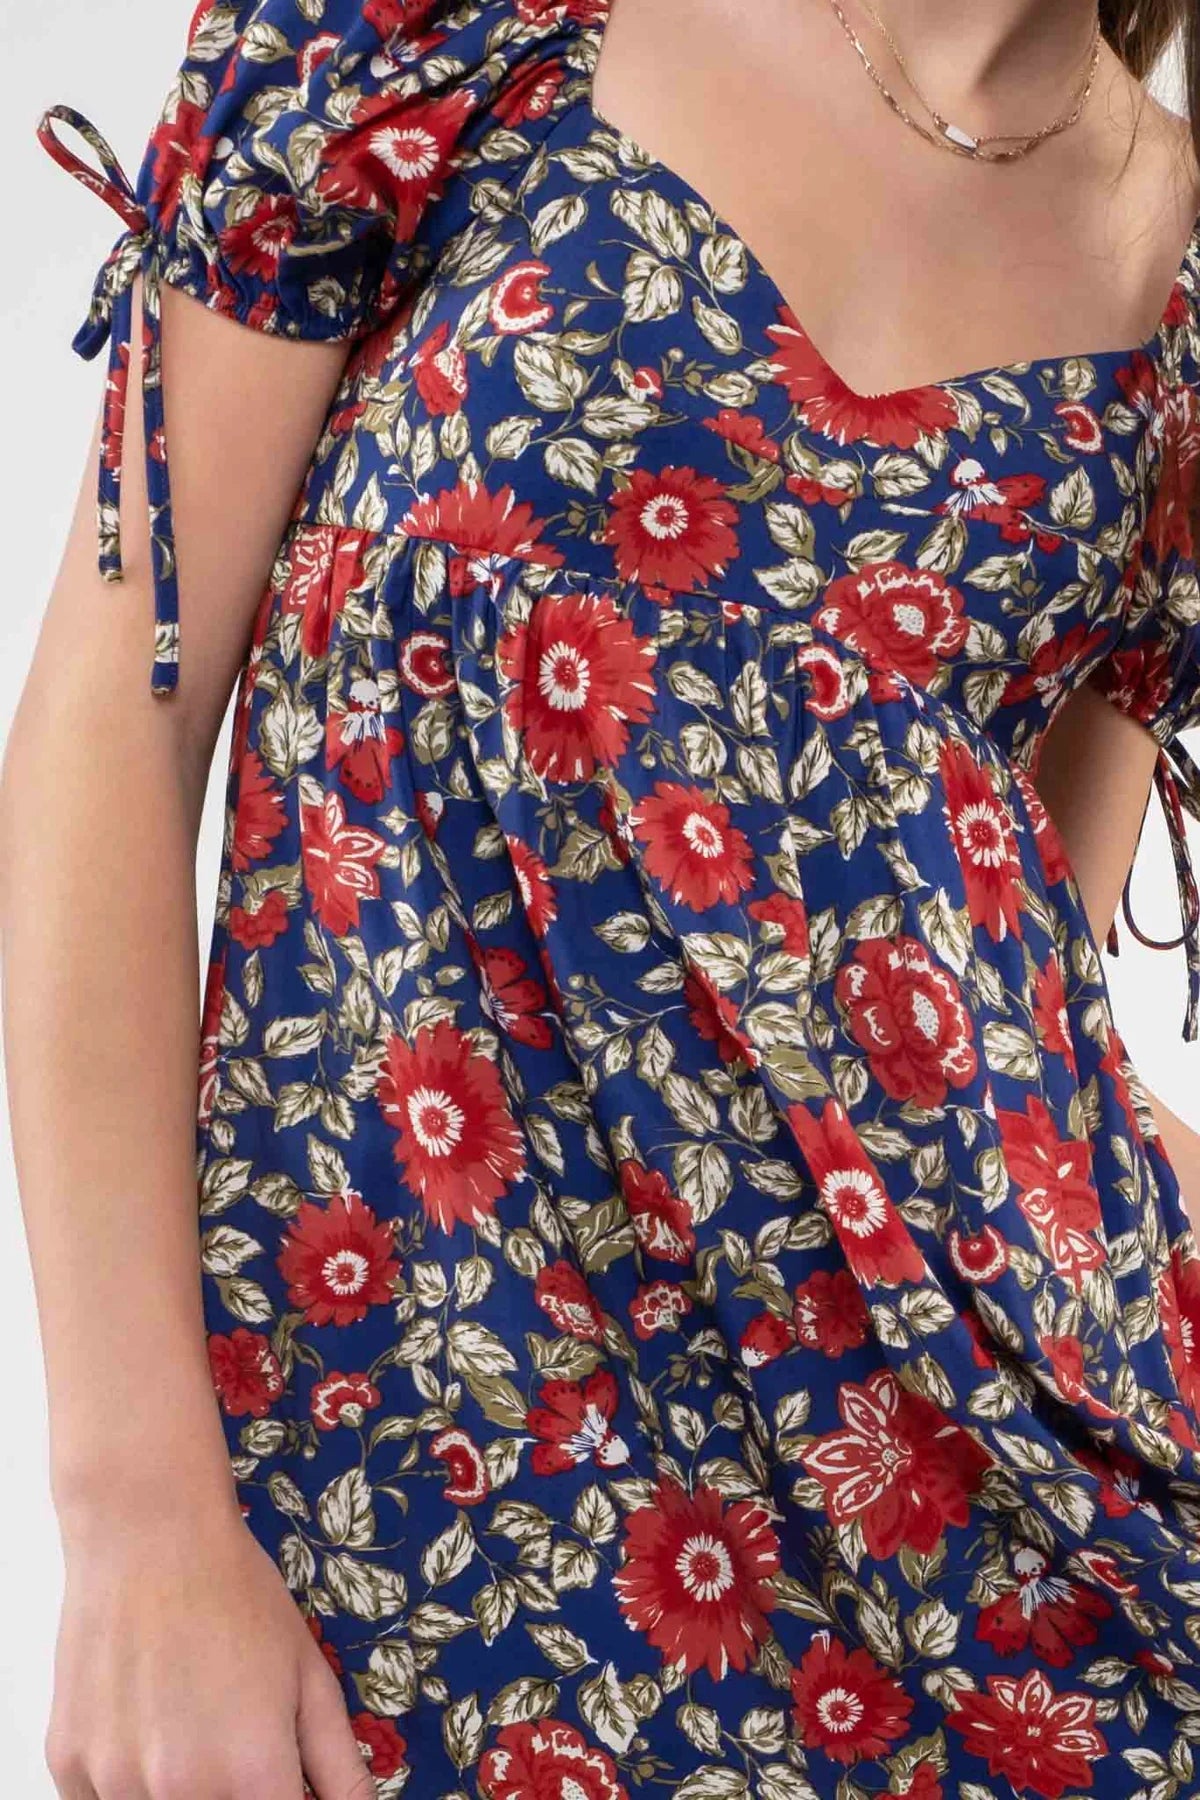 Floral Sweetheart Neck Dress